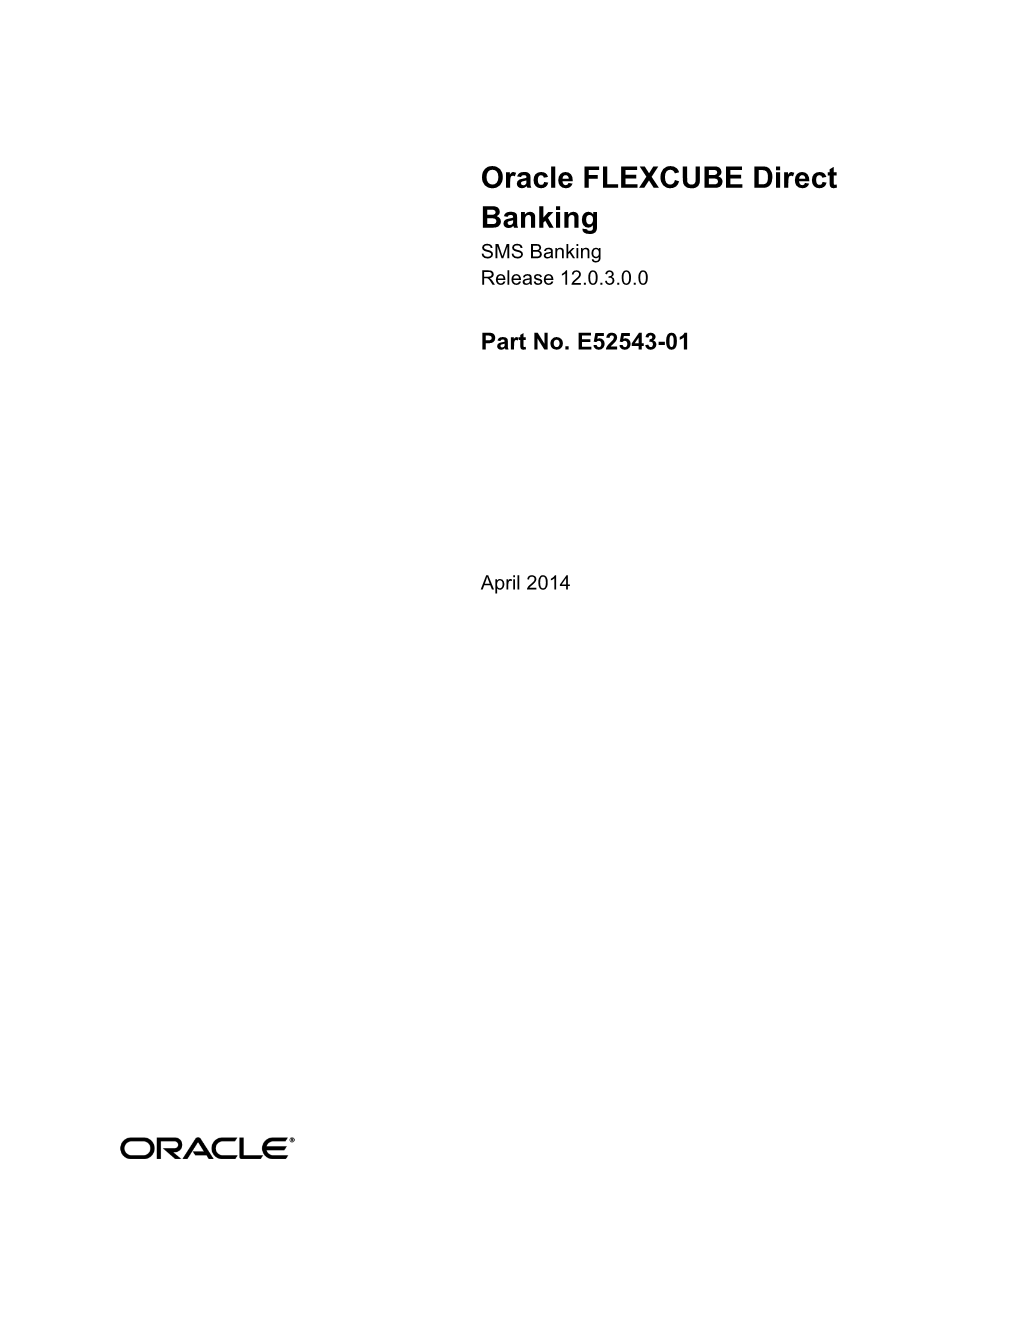 Oracle FLEXCUBE Direct Banking SMS Banking Release 12.0.3.0.0